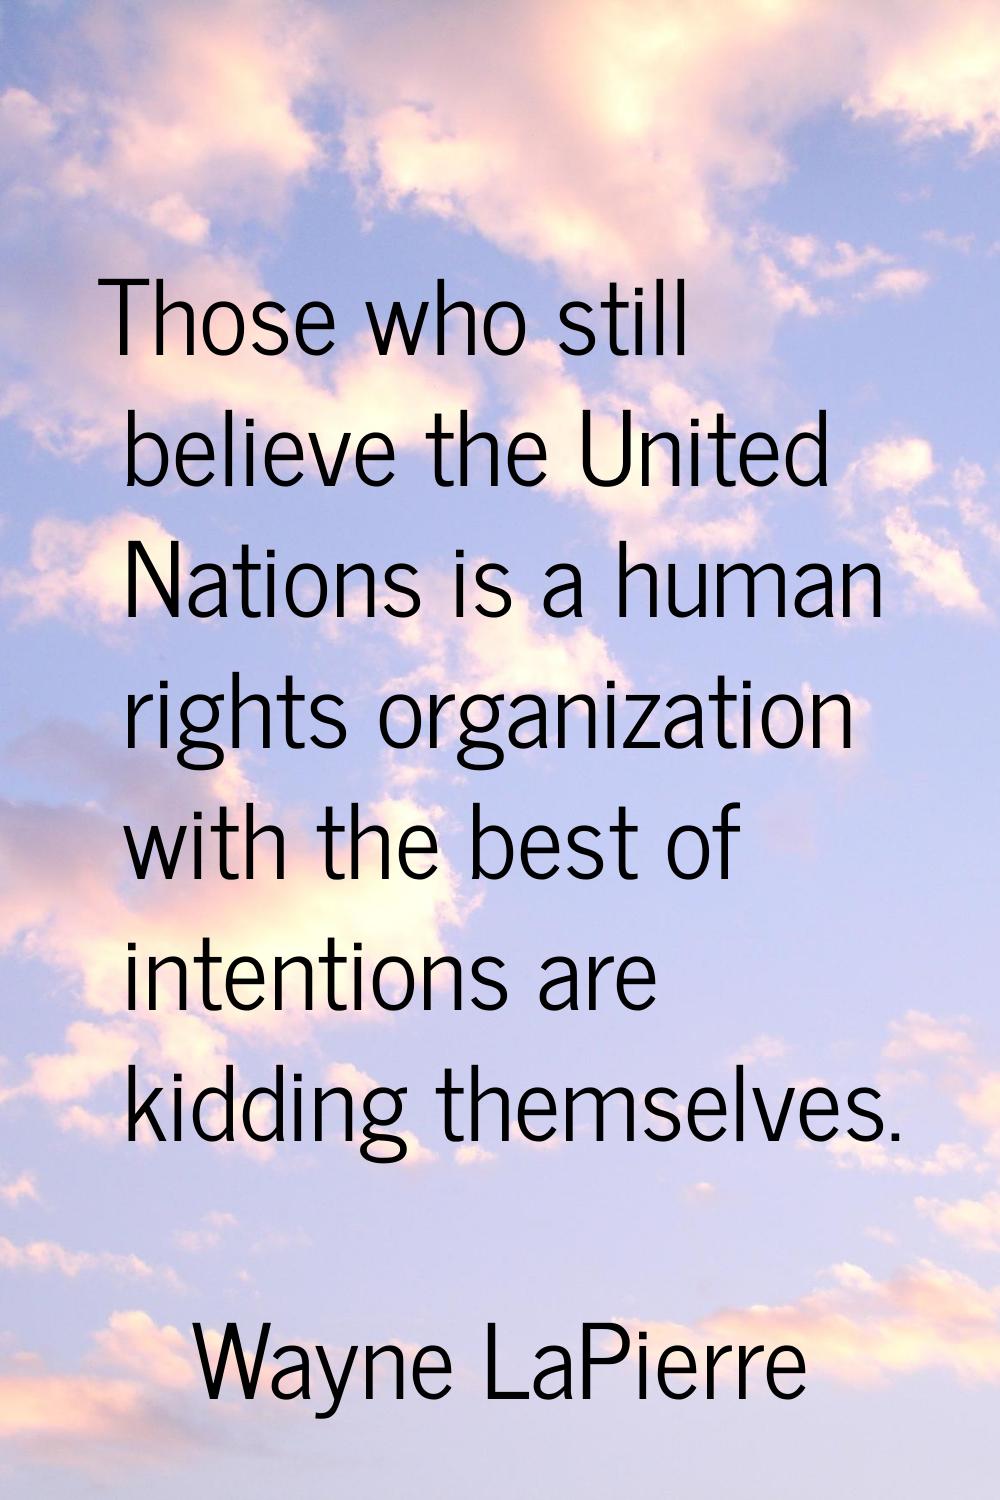 Those who still believe the United Nations is a human rights organization with the best of intentio